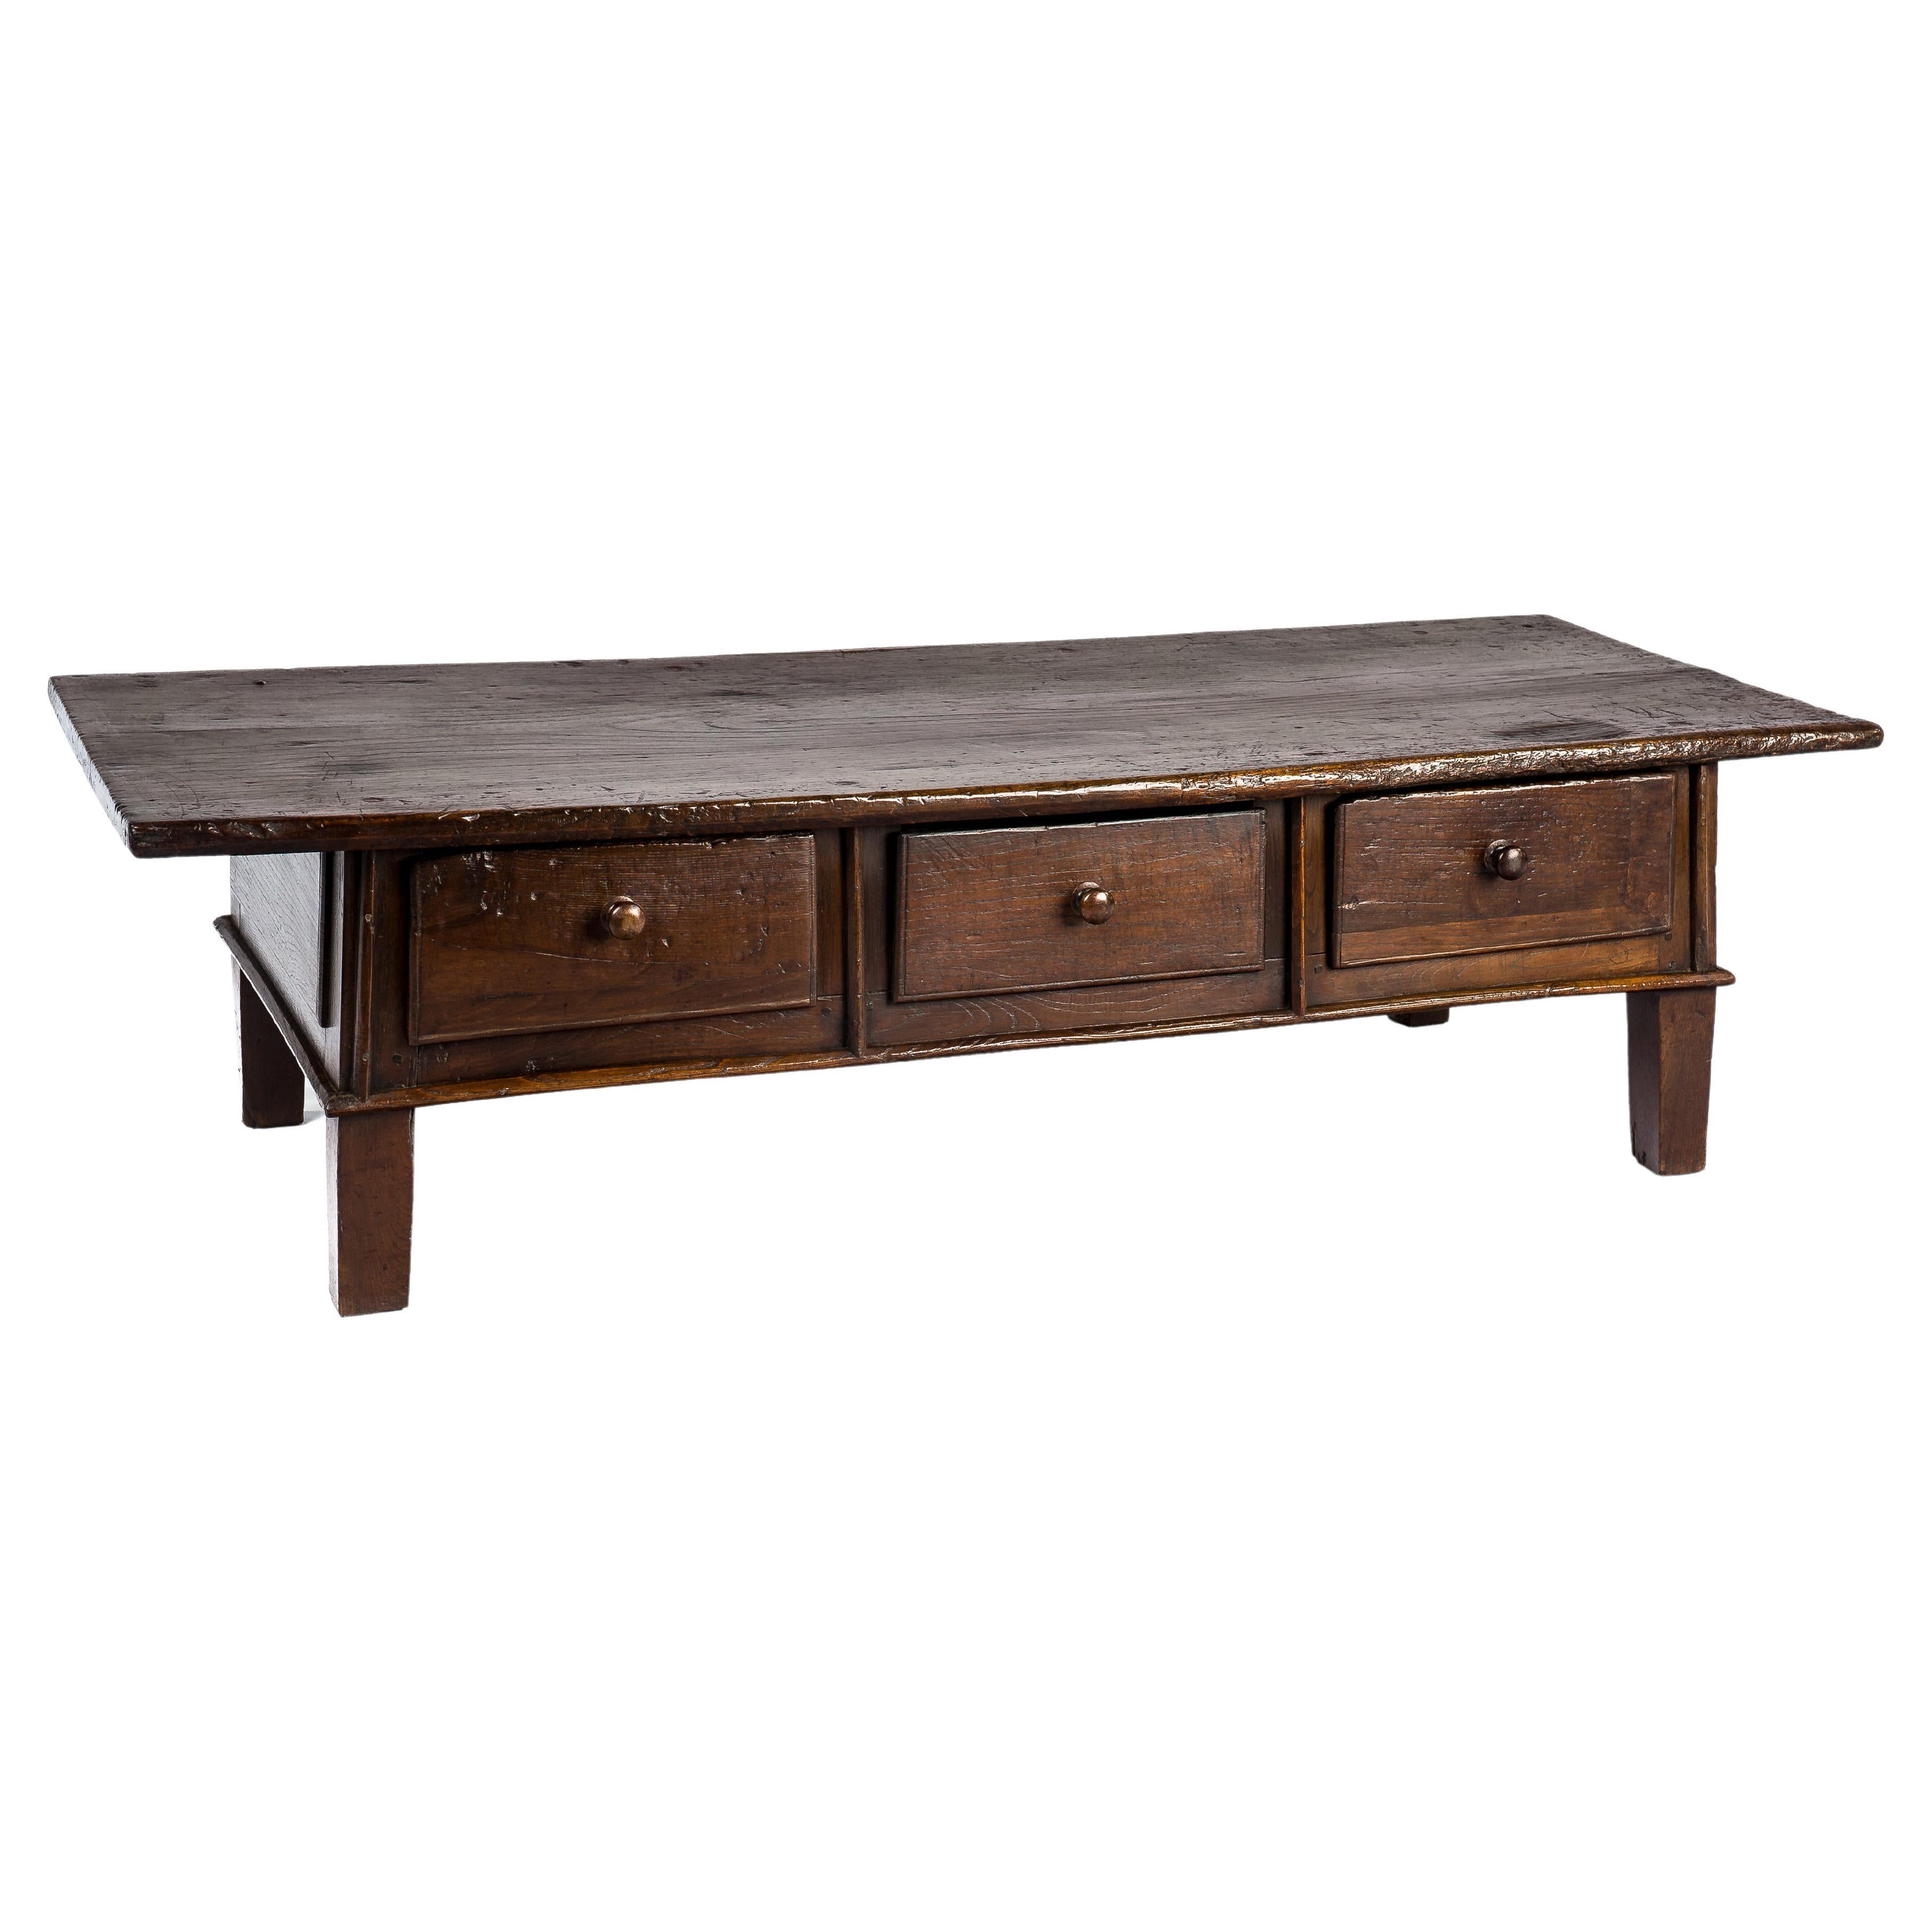 Antique 18th-Century Rustic Spanish Warm Brown Chestnut Coffee Table